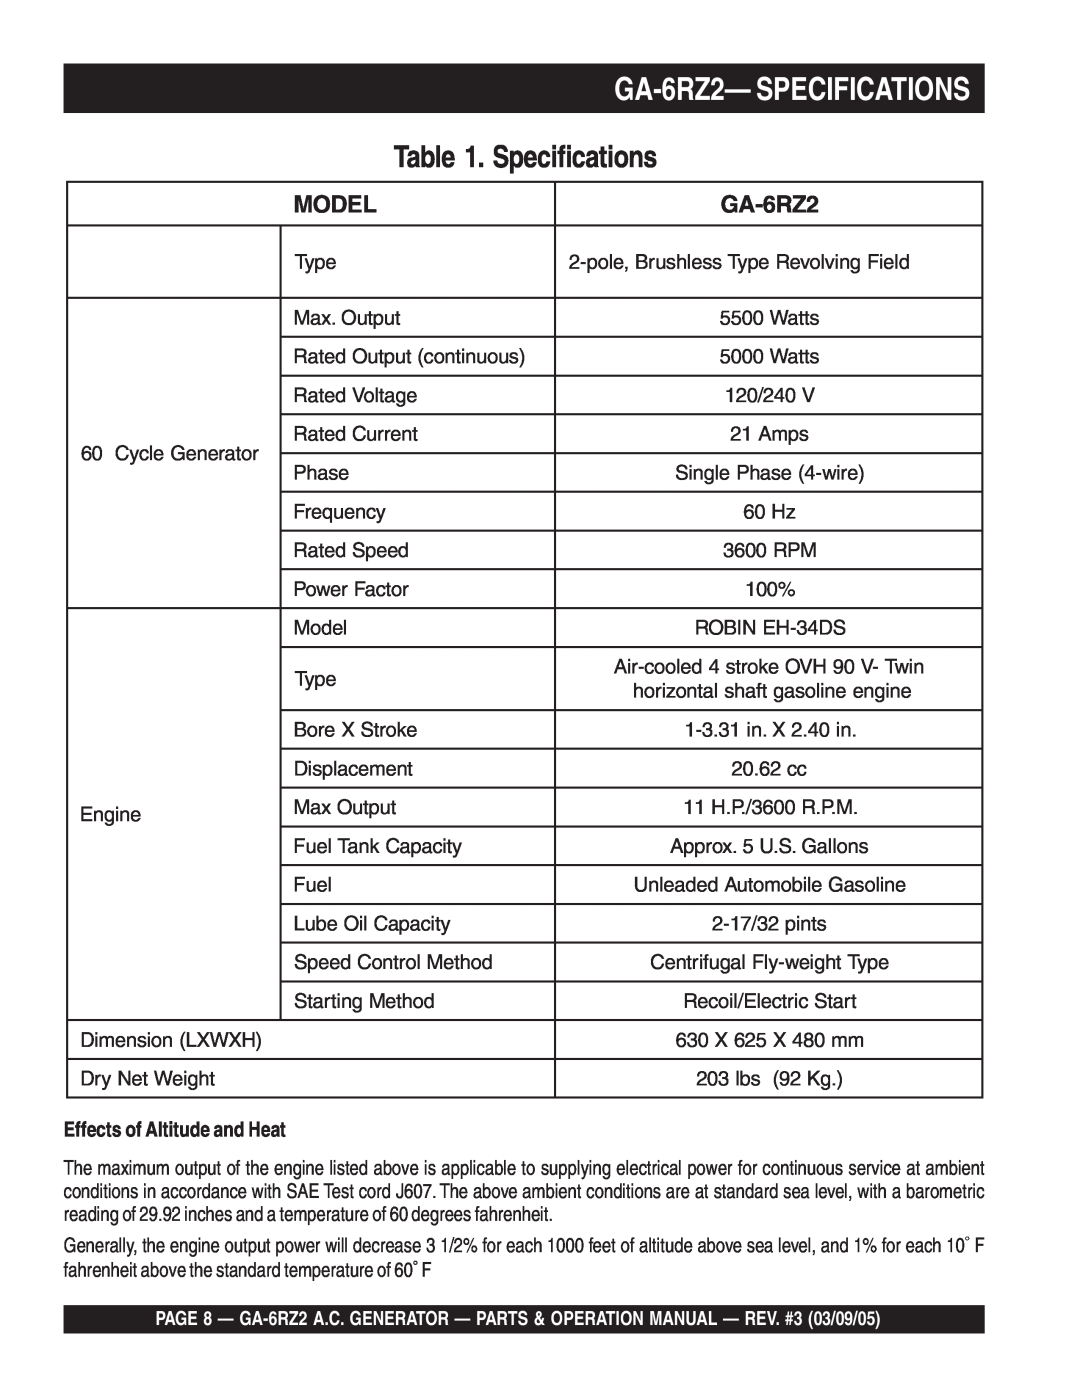 Multiquip operation manual Specifications, GA-6RZ2-SPECIFICATIONS, Model, Effects of Altitude and Heat 